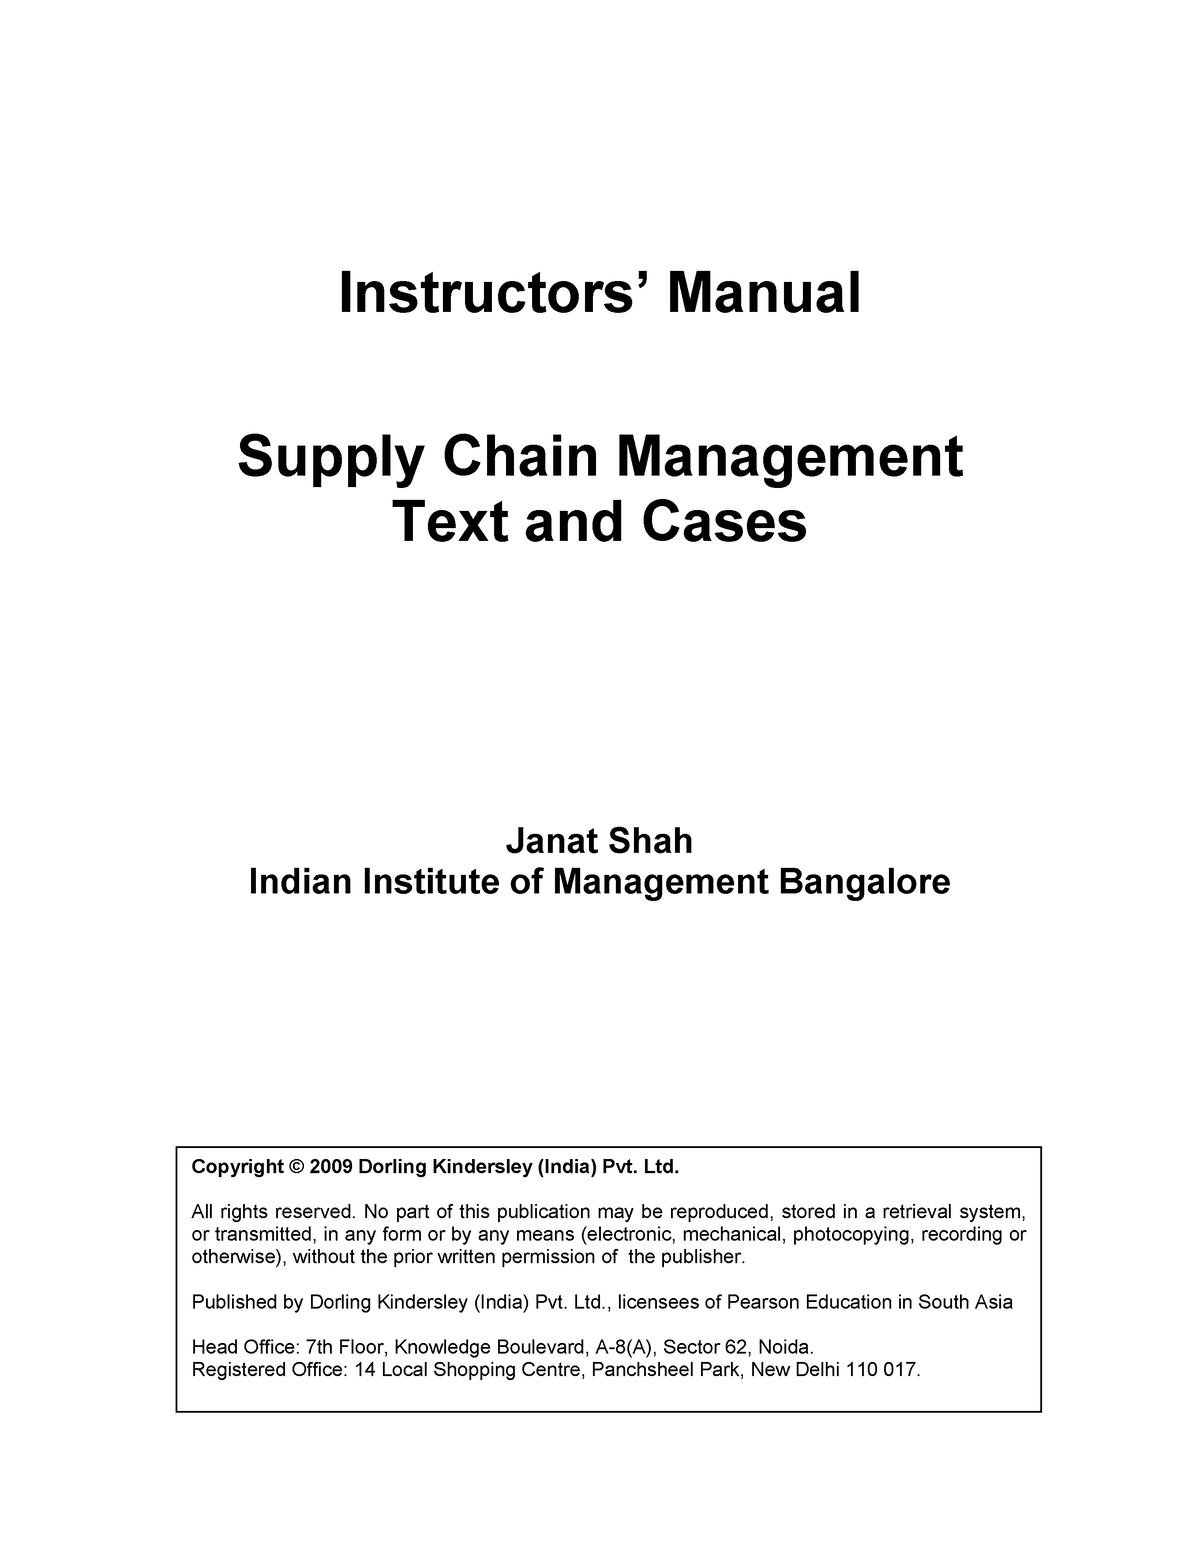 thesis topic for supply chain management